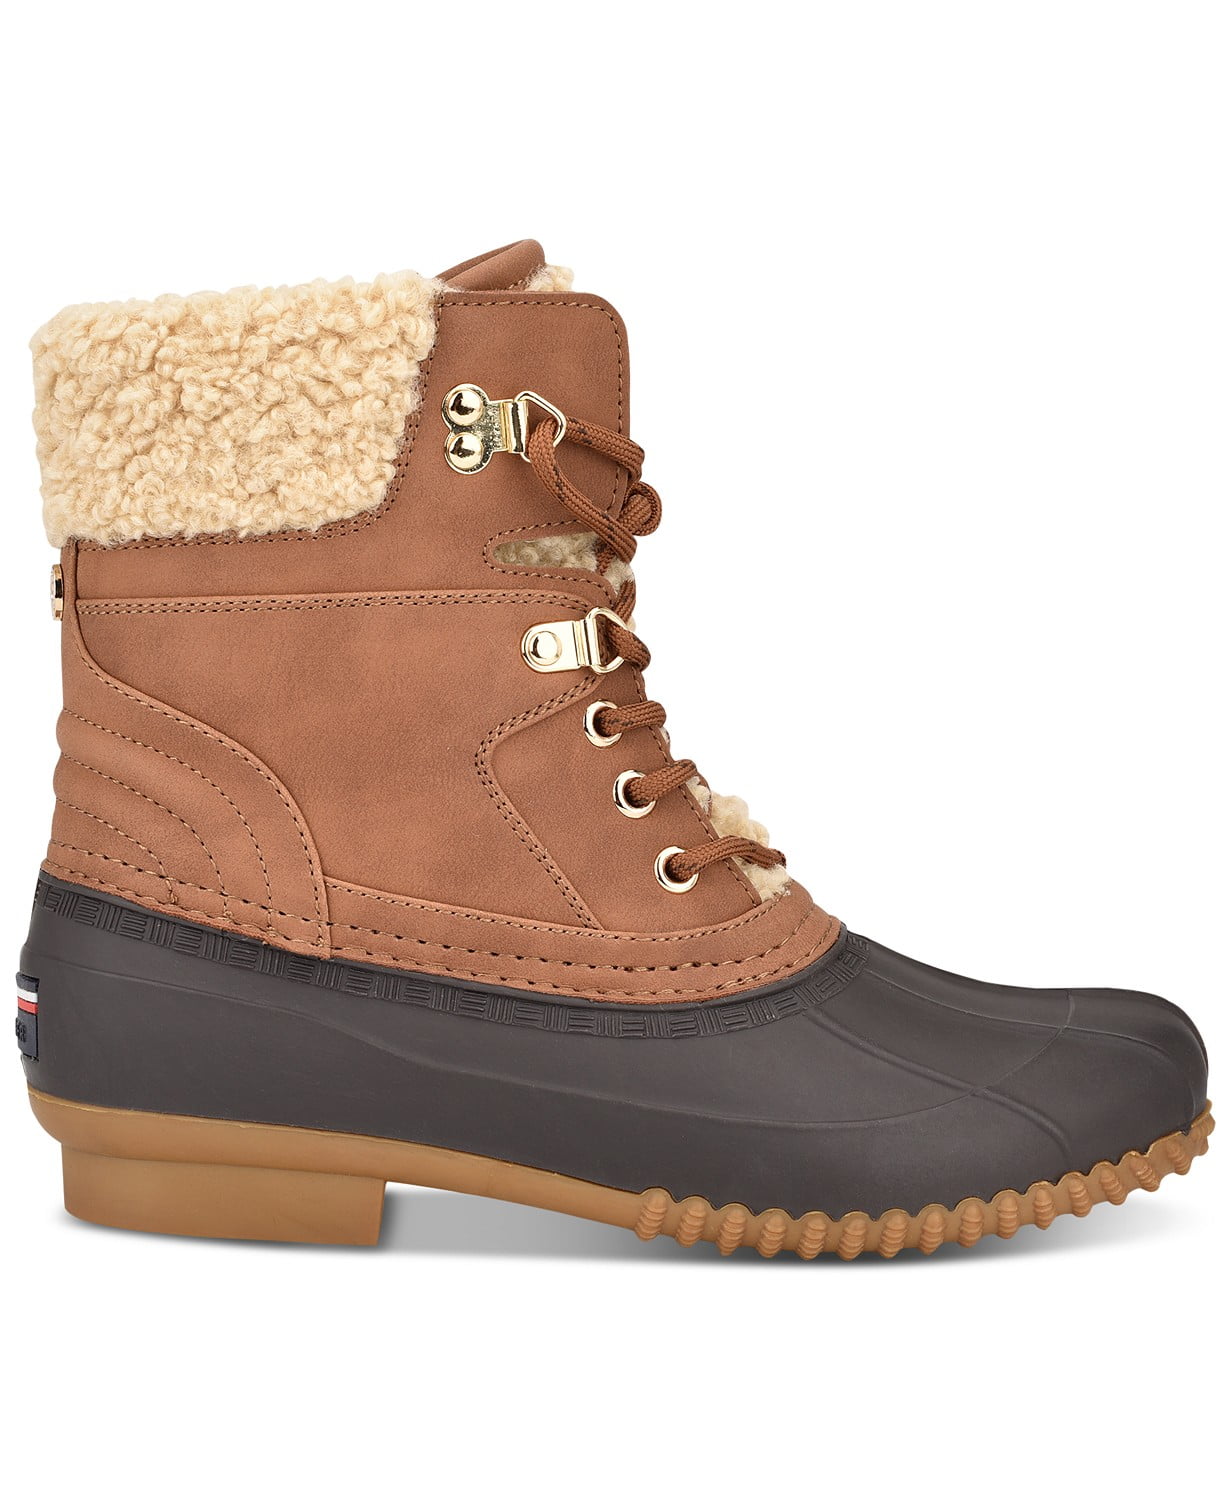 woocommerce-673321-2209615.cloudwaysapps.com-tommy-hilfiger-womens-brown-rainah-boots